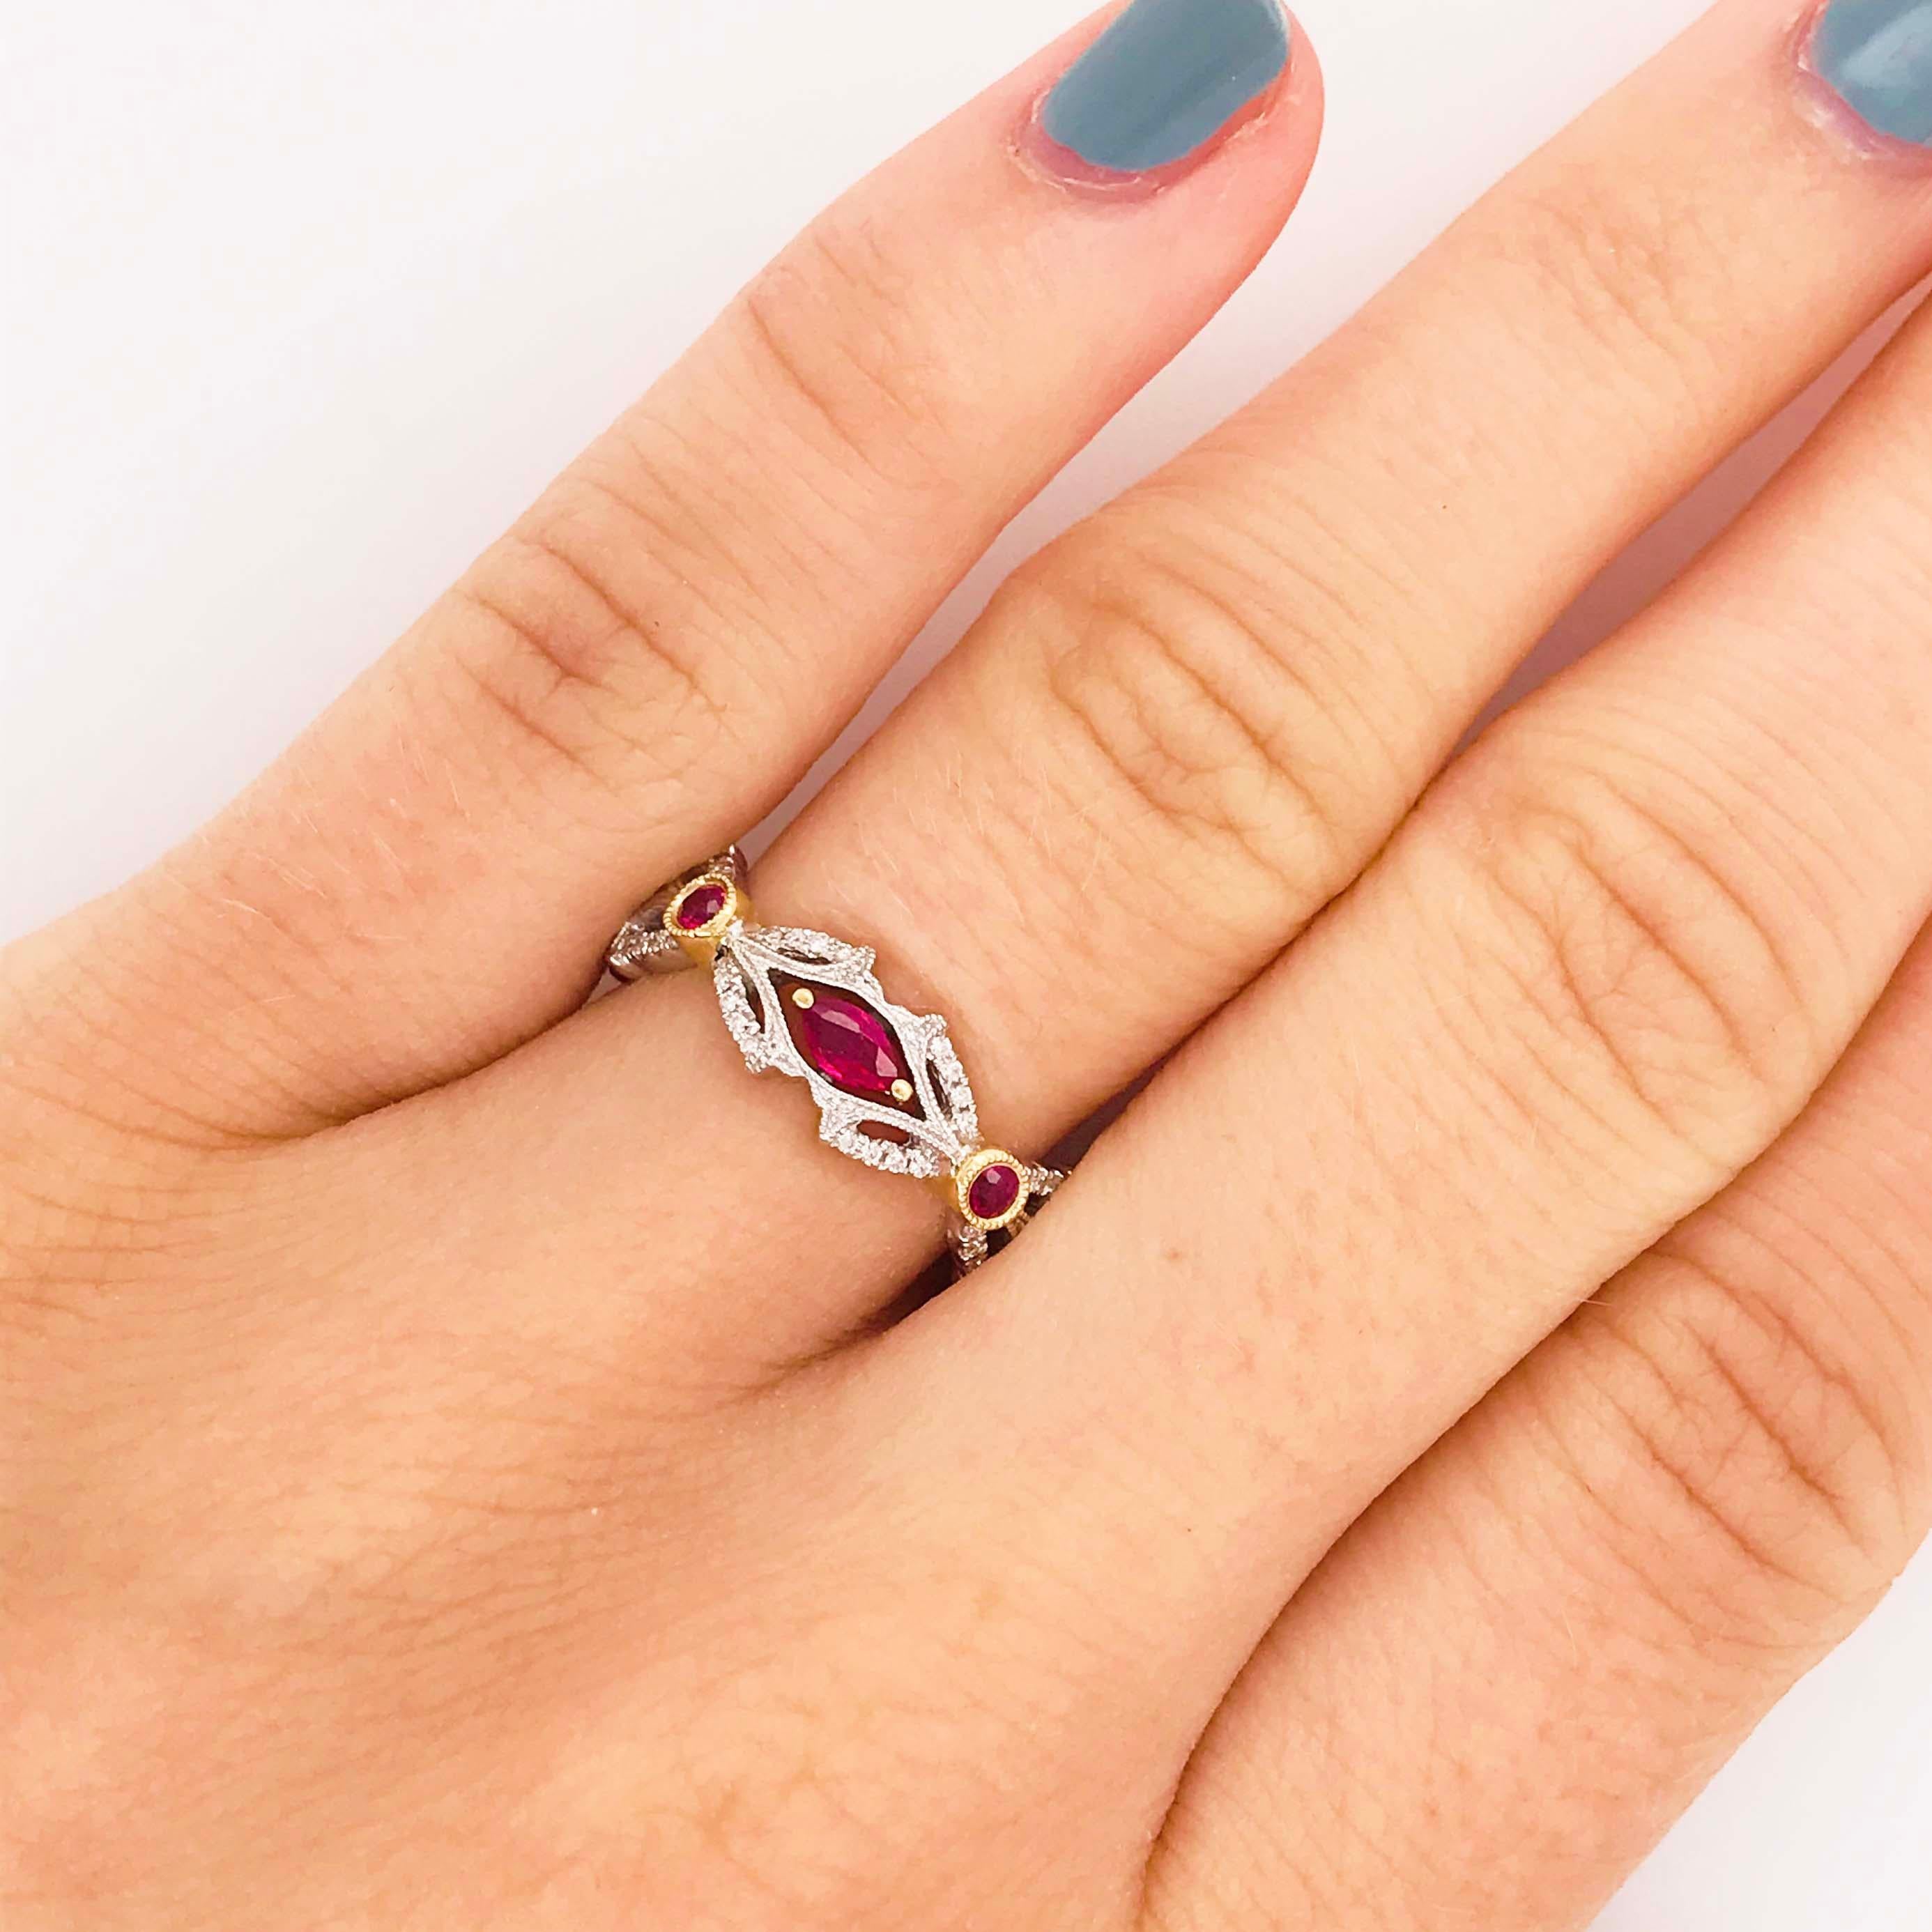 The unique ruby and diamond band has a very artistic and creative design that is one of a kind and very special! The ruby and diamond ring has marquise shaped ruby gemstones set horizontally in yellow gold prongs. The marquise rubies are framed with